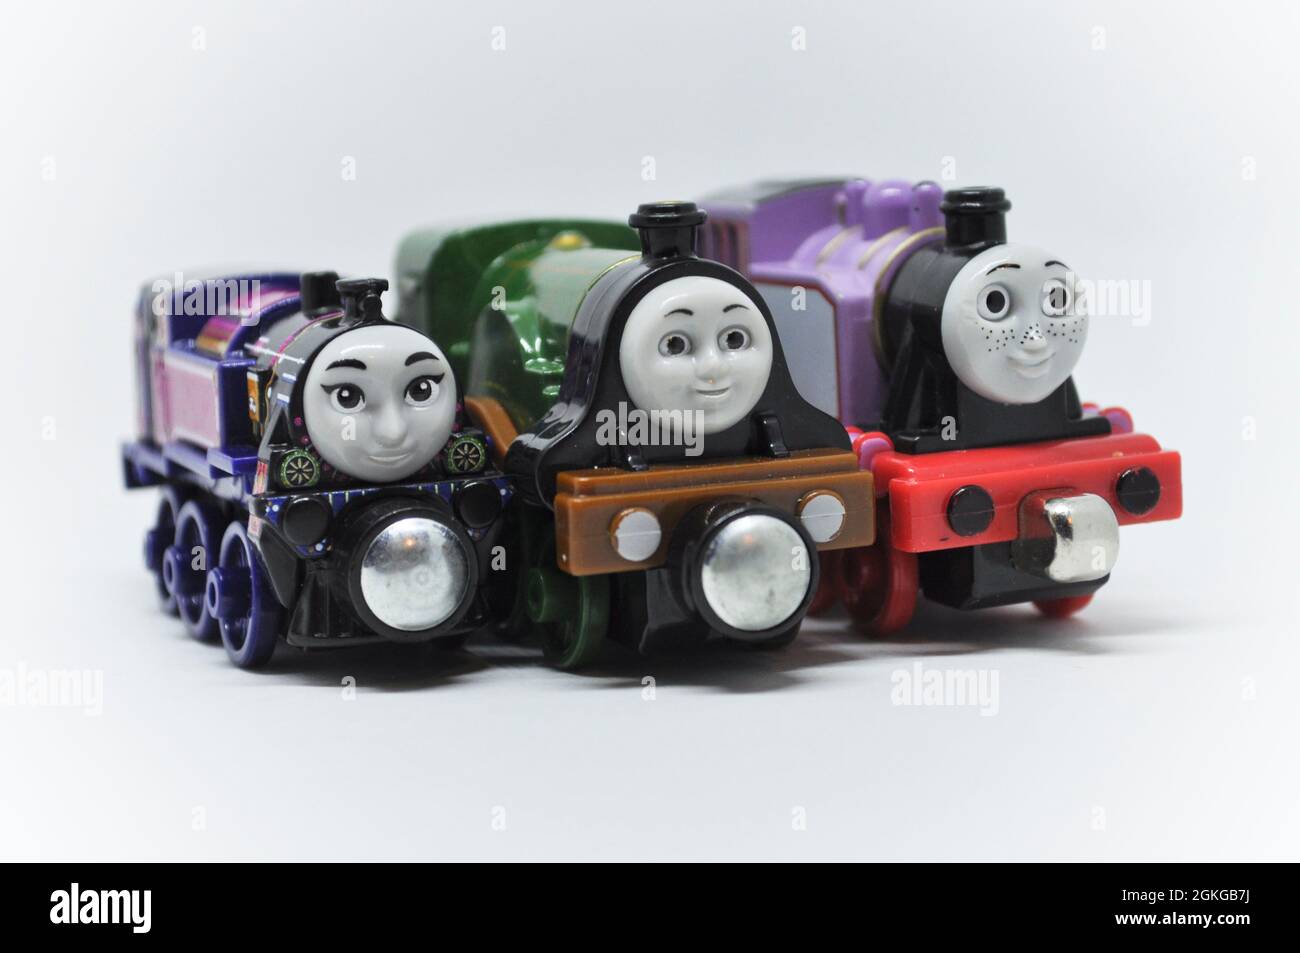 Three strong female engines from Thomas the tank engine series set against a white background. Stock Photo